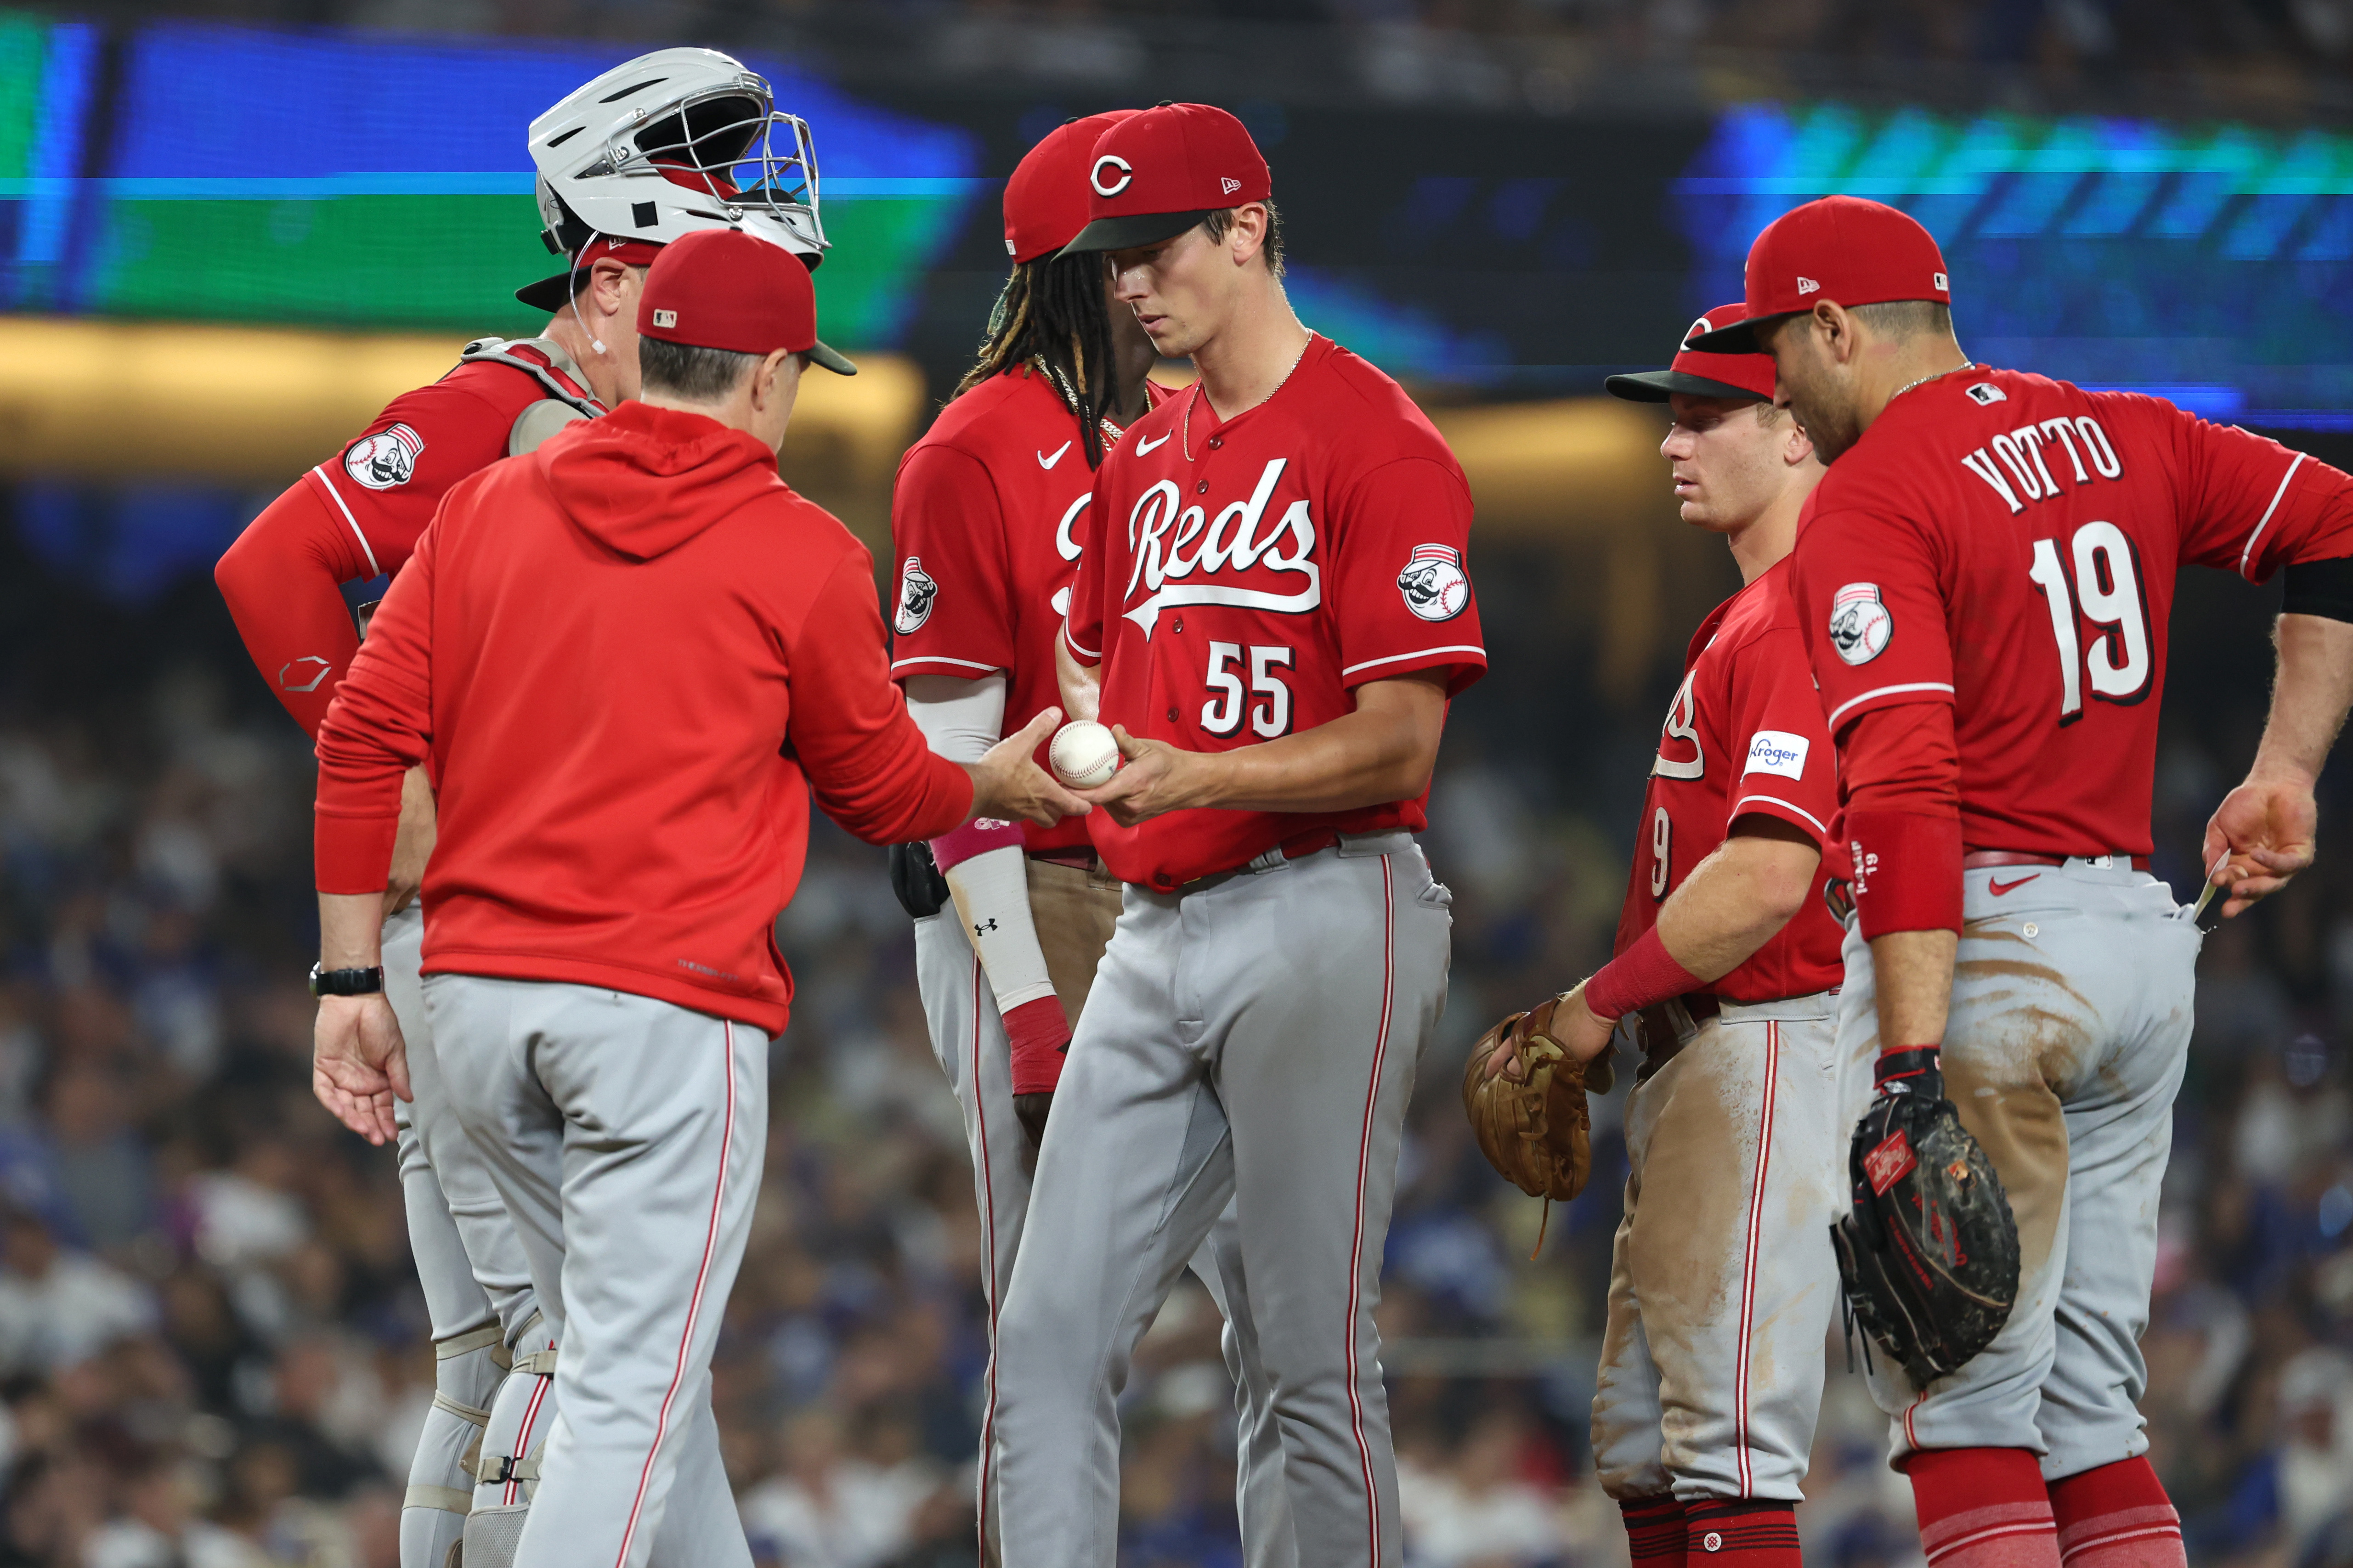 Reds hit two homers, hold on to beat Dodgers